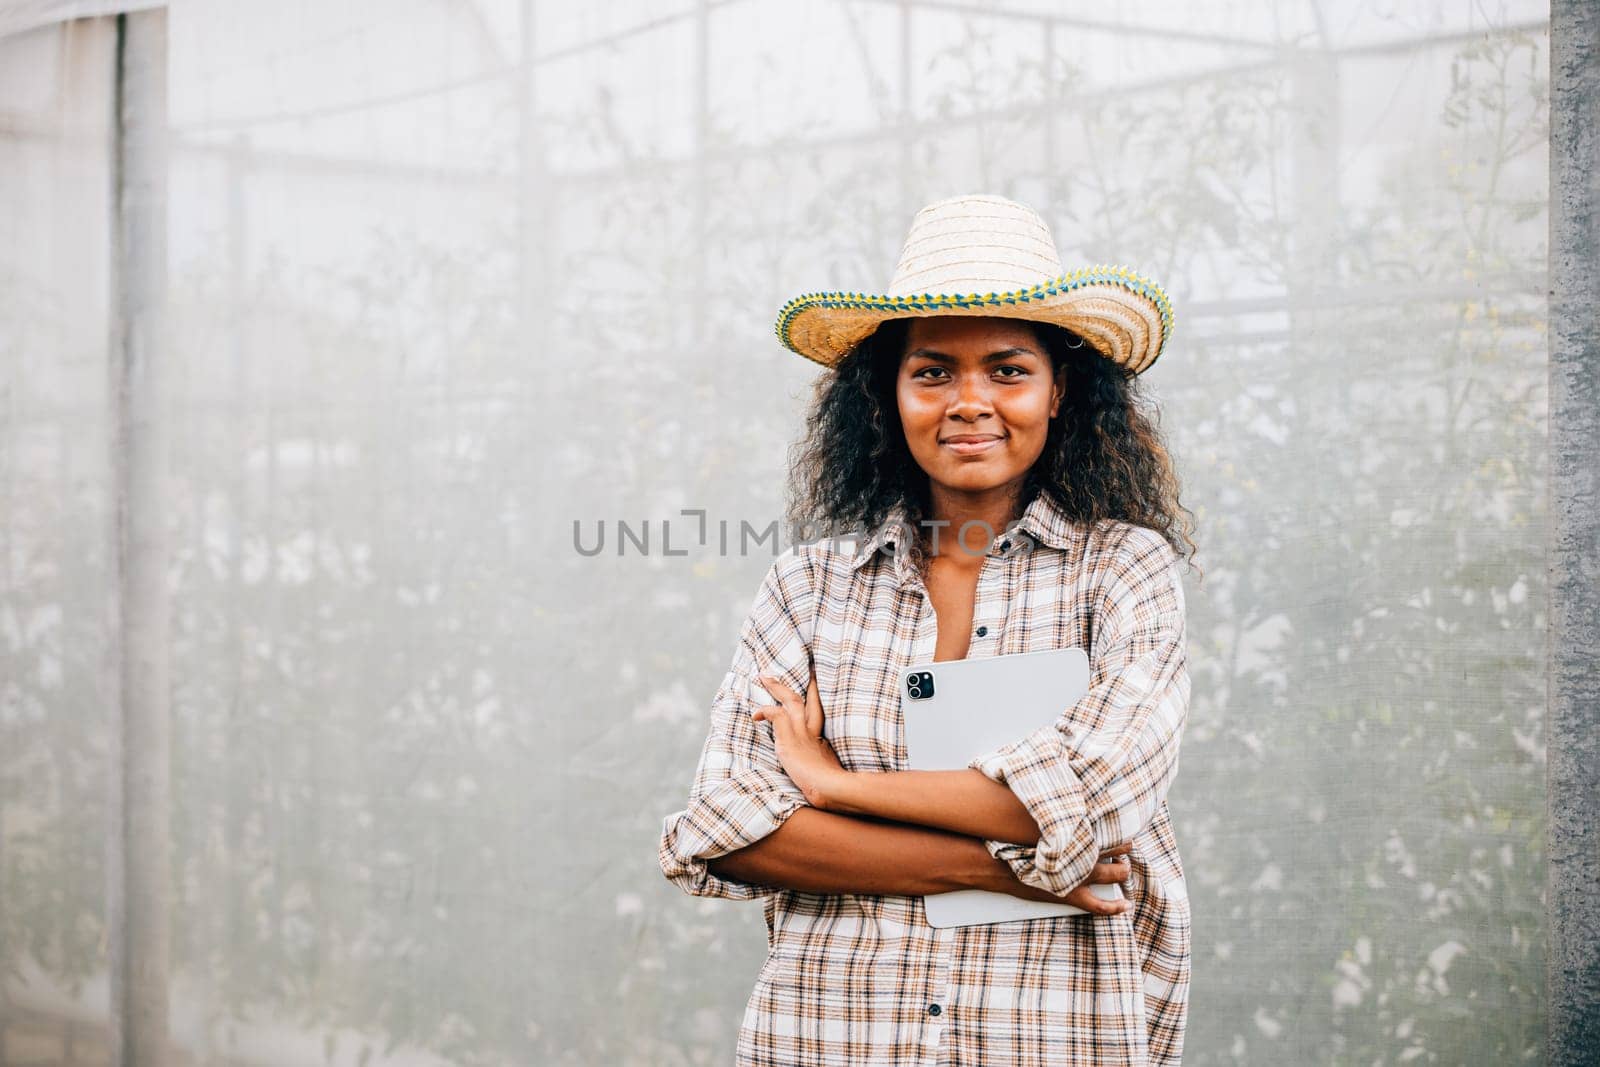 PhotoSuccessful greenhouse owner a young woman in a checked shirt and apron stands with arms crossed smiling of a woman posing confidently with a straw hat and crossed arms by Sorapop